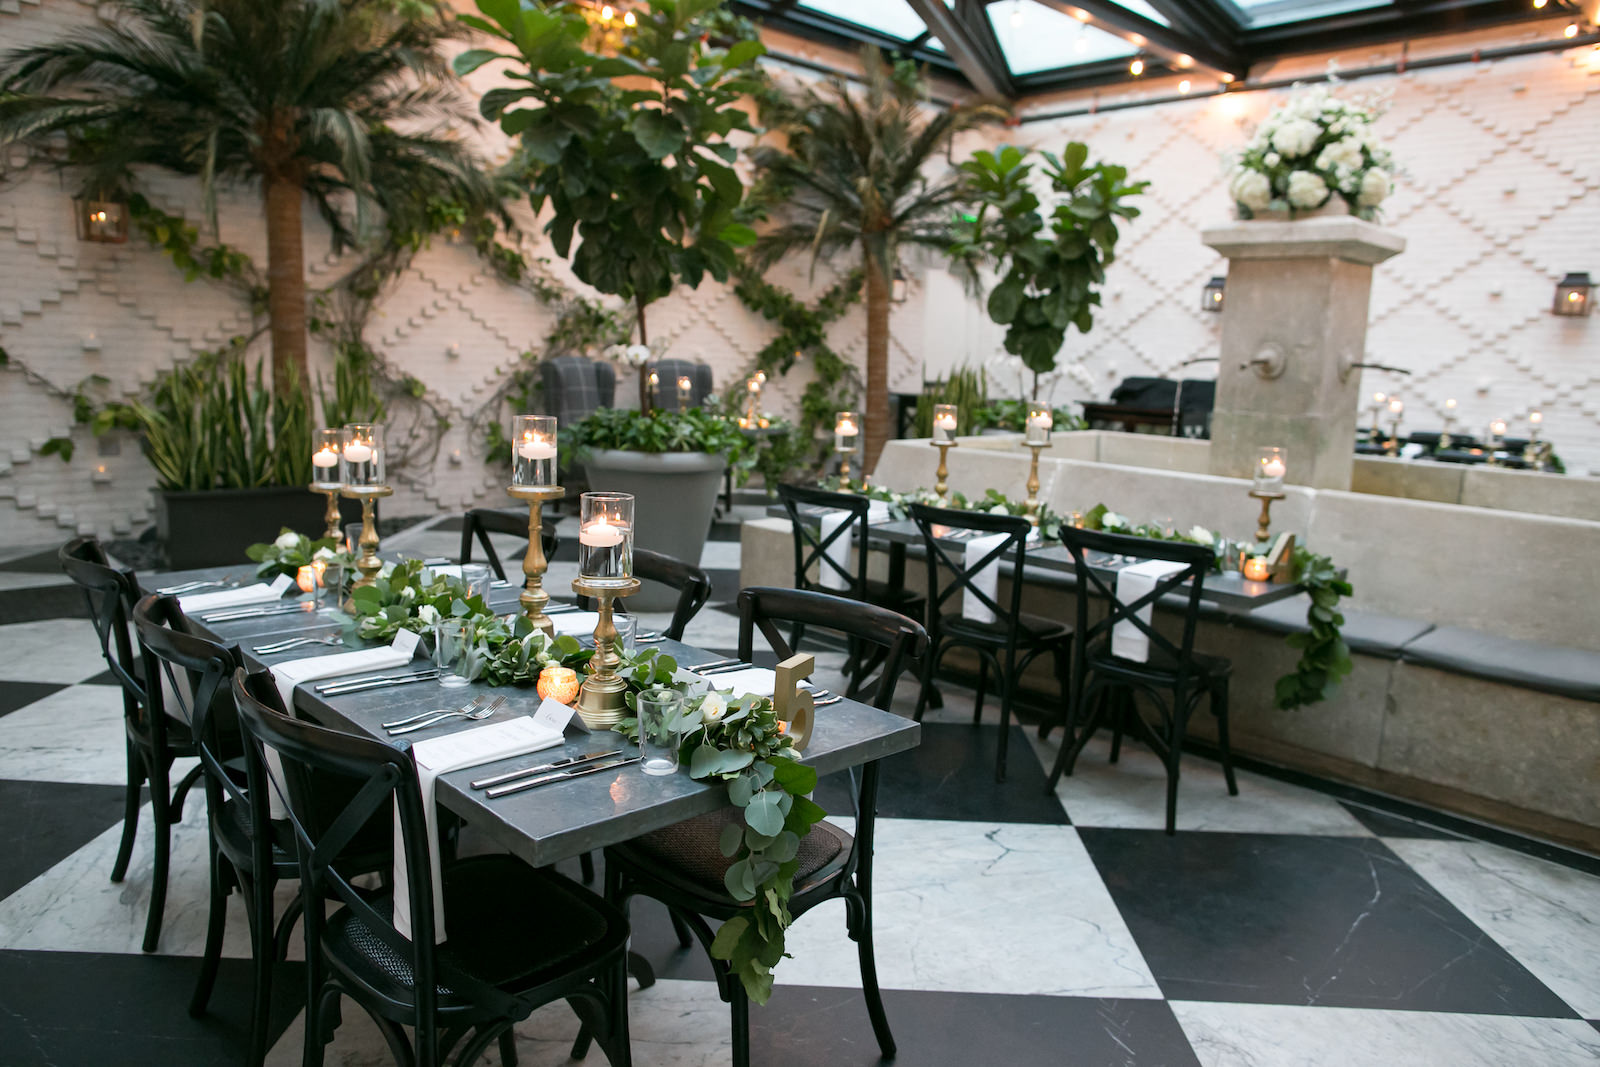 Tampa Wedding Reception at Oxford Exchange Downtown Tampa | Long Metal Banquet Tables with Black Cross Back Chairs and White Napkins | Wedding Centerpieces of Floating Pedestal Candles and Greenery Garland